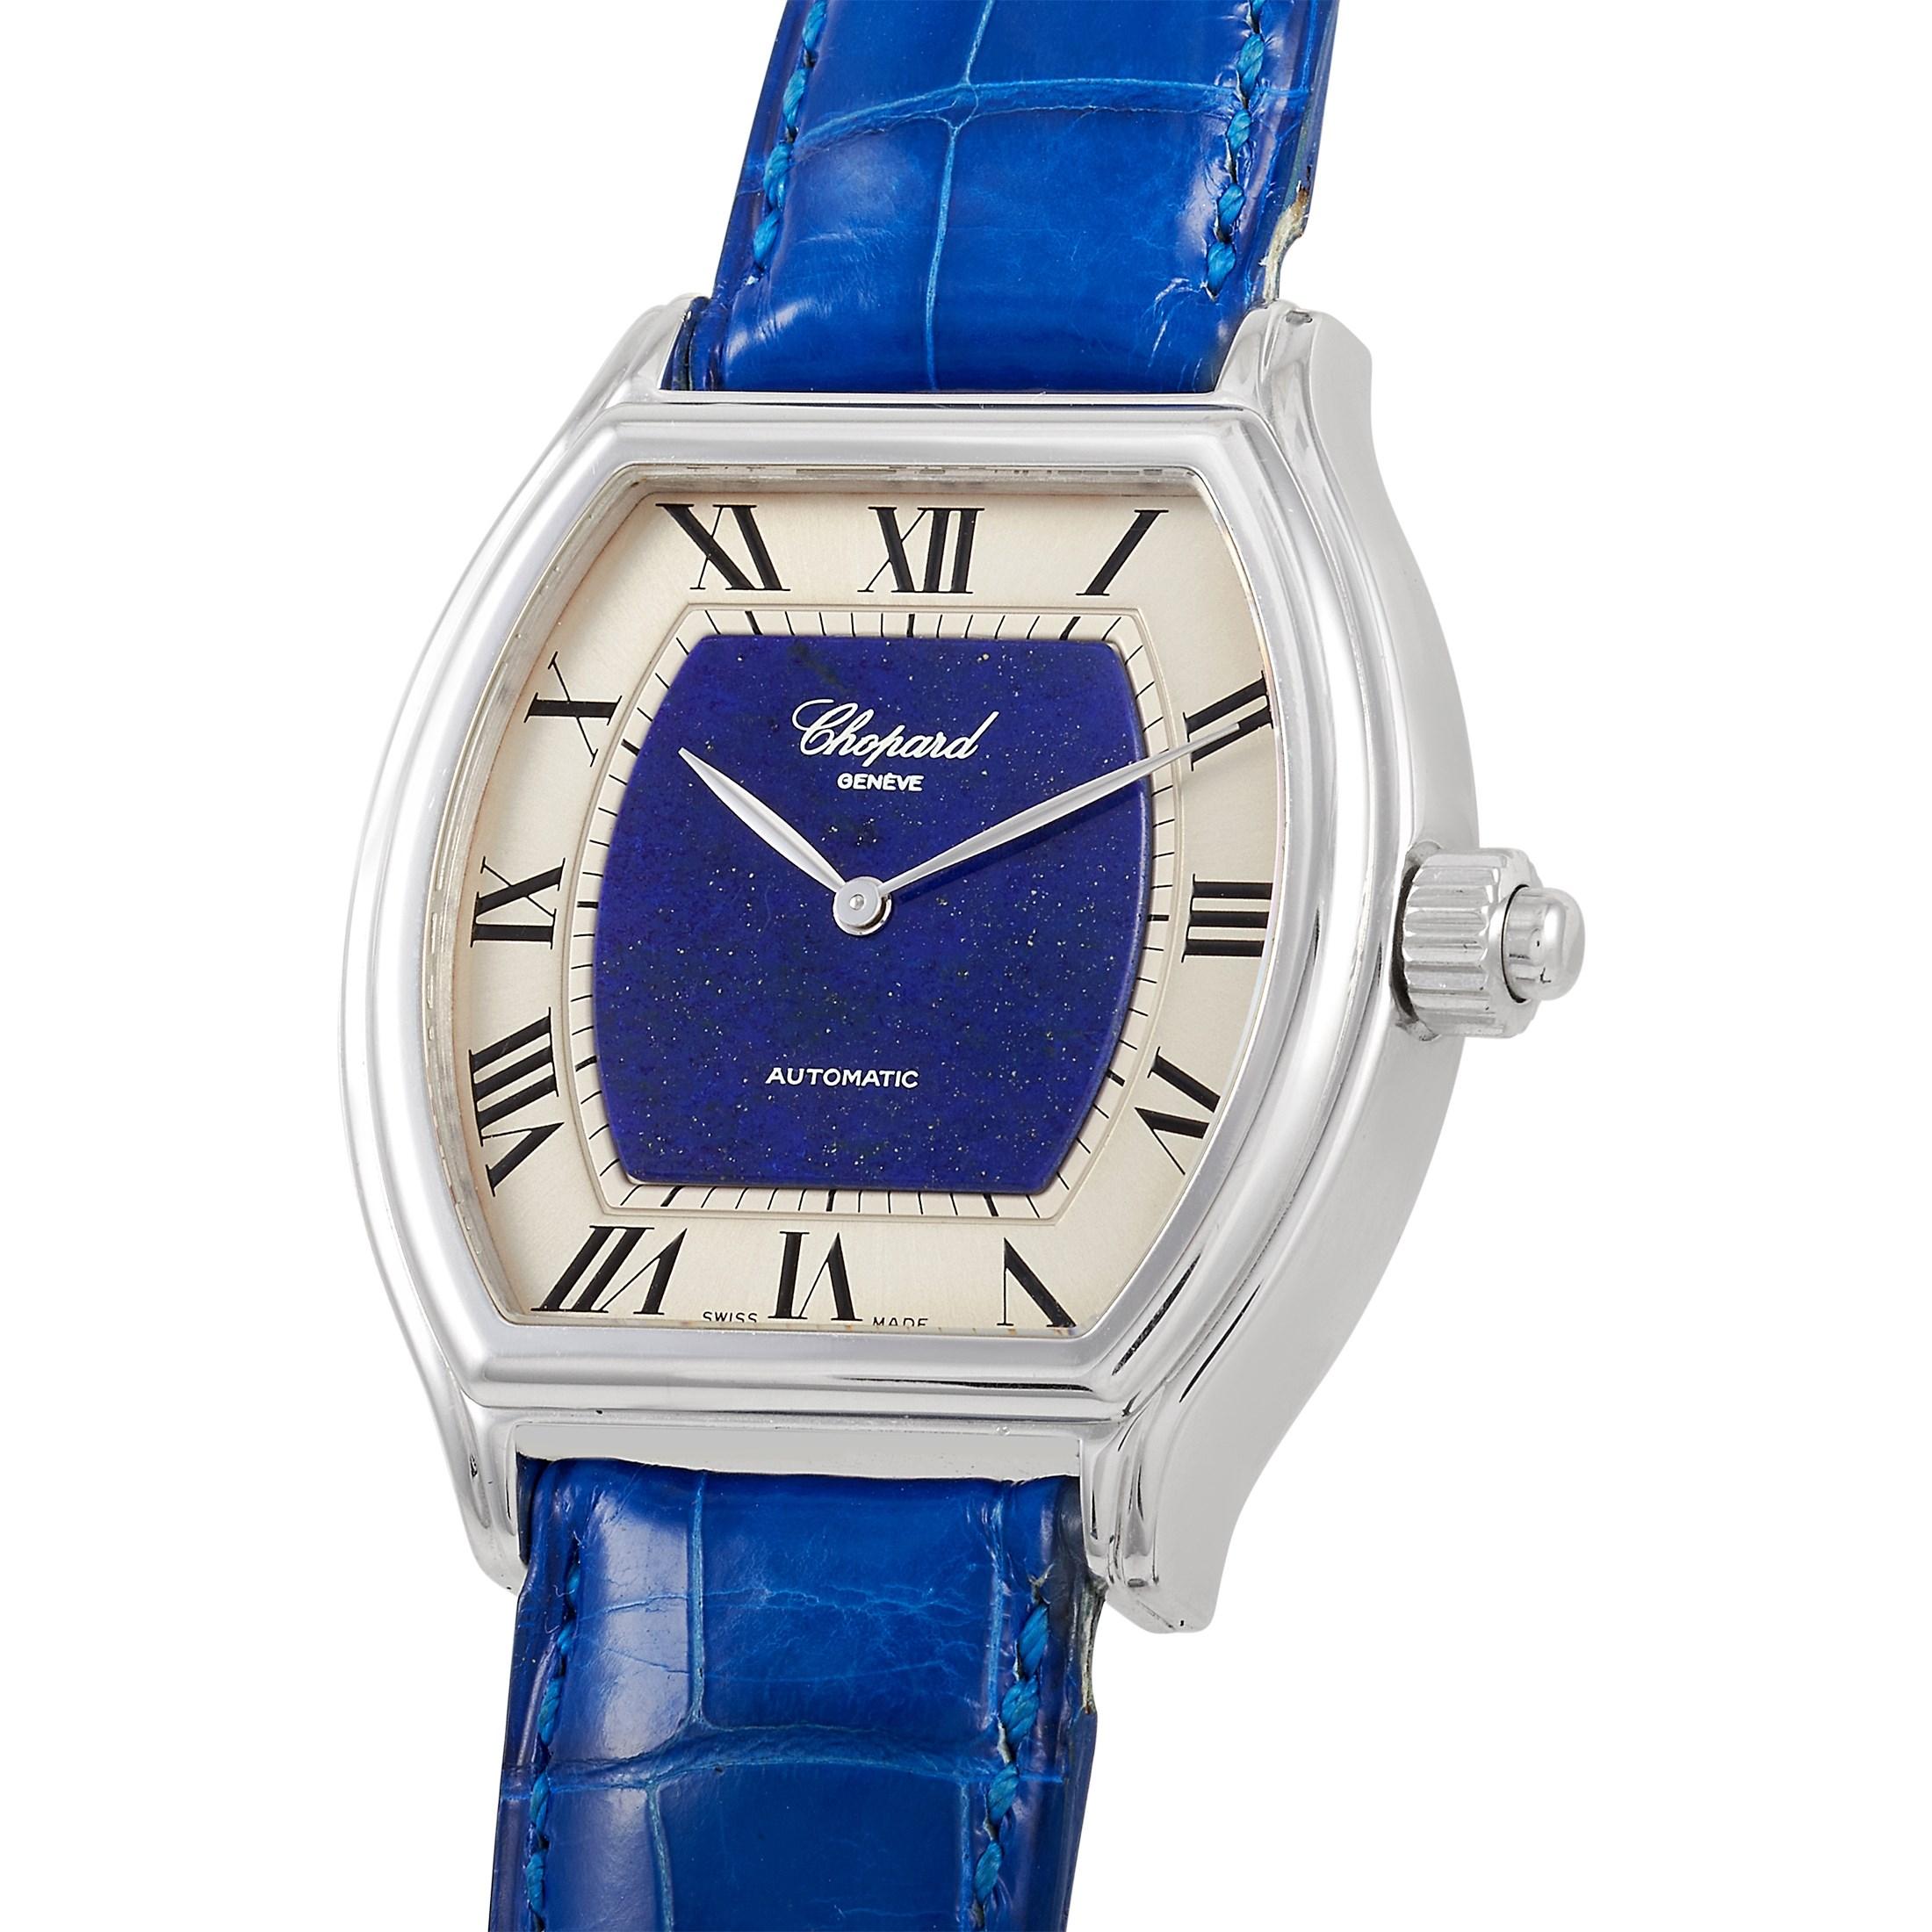 This Chopard Tonneau-shaped Concealed Erotic Watch, reference number 16/2254/478 is a unique and rare piece. The case is presented in 18K white gold, and measures 43mm in diameter, and comes on a blue leather strap. The case back features an